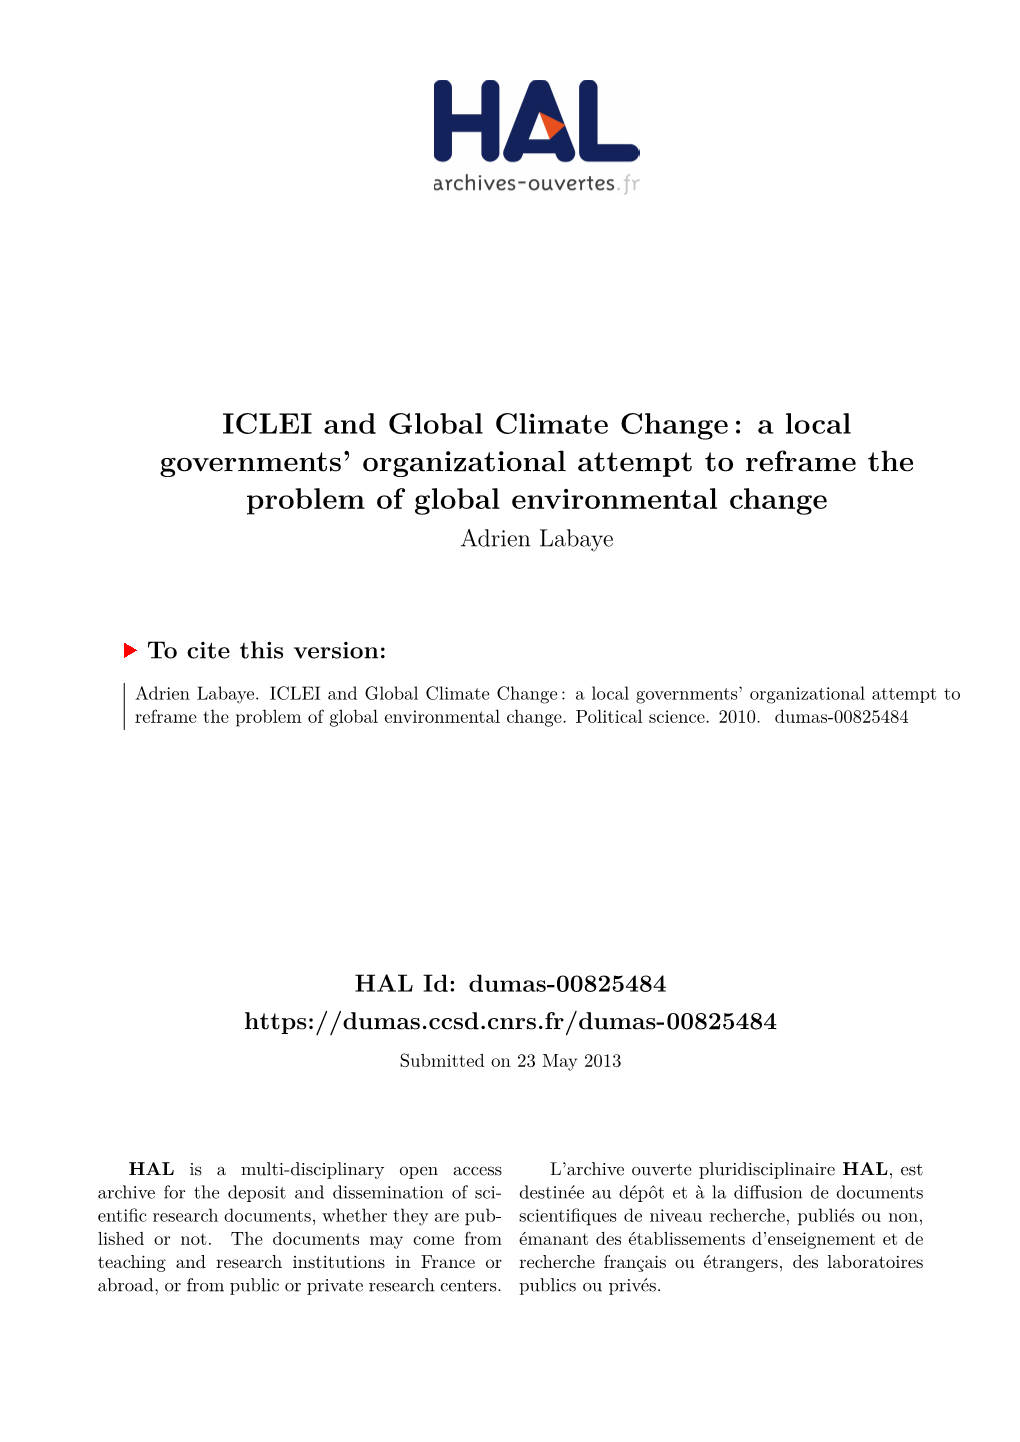 ICLEI and Global Climate Change : a Local Governments’ Organizational Attempt to Reframe the Problem of Global Environmental Change Adrien Labaye